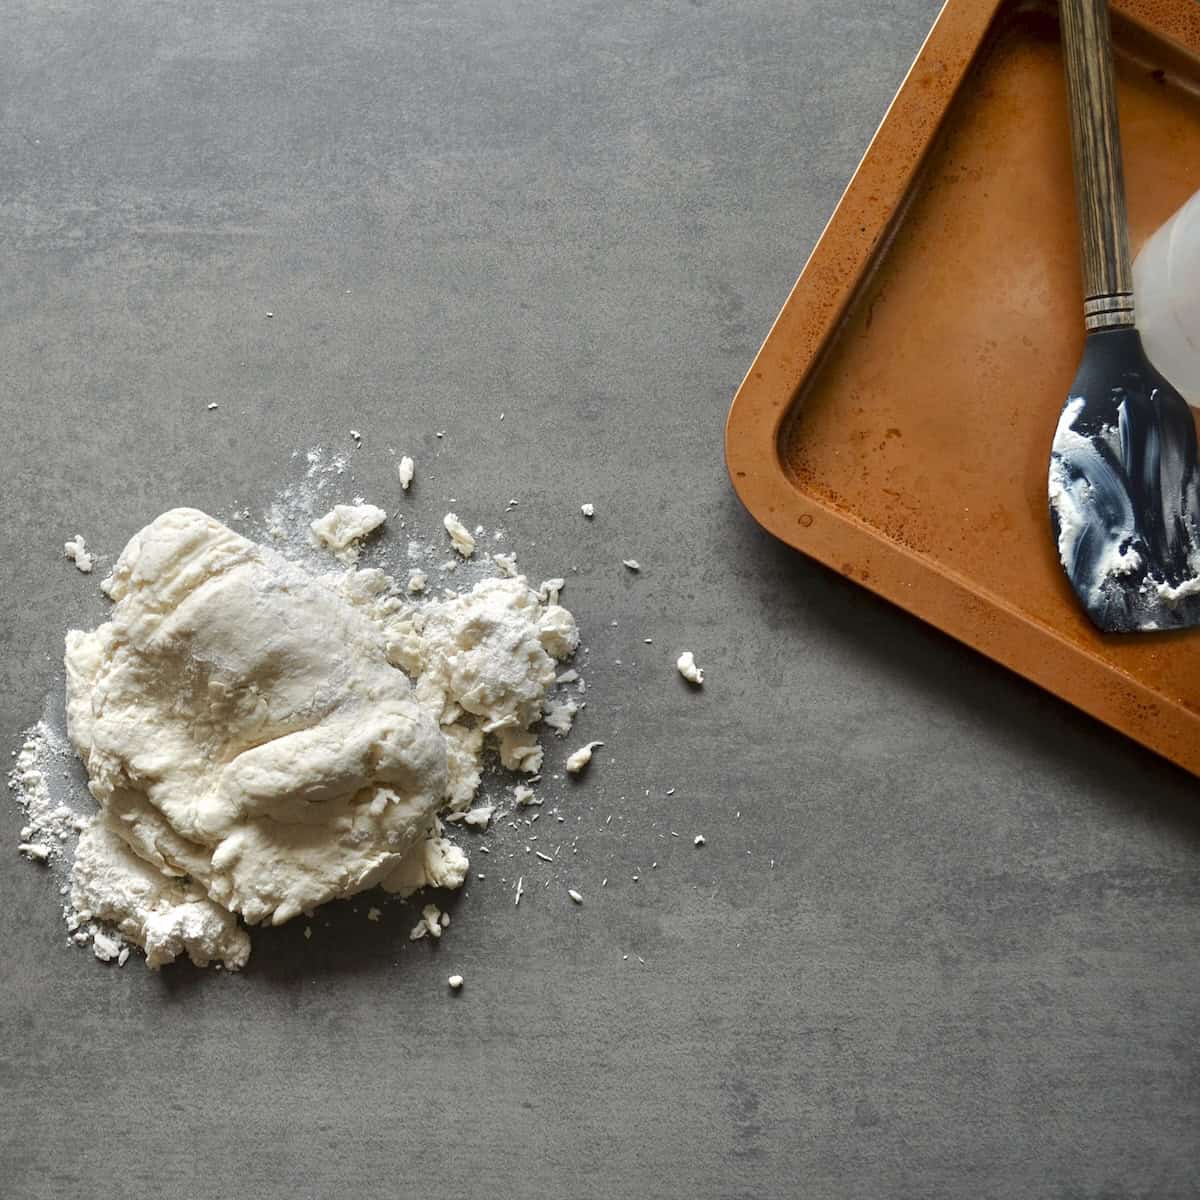 Bread dough and baking tools